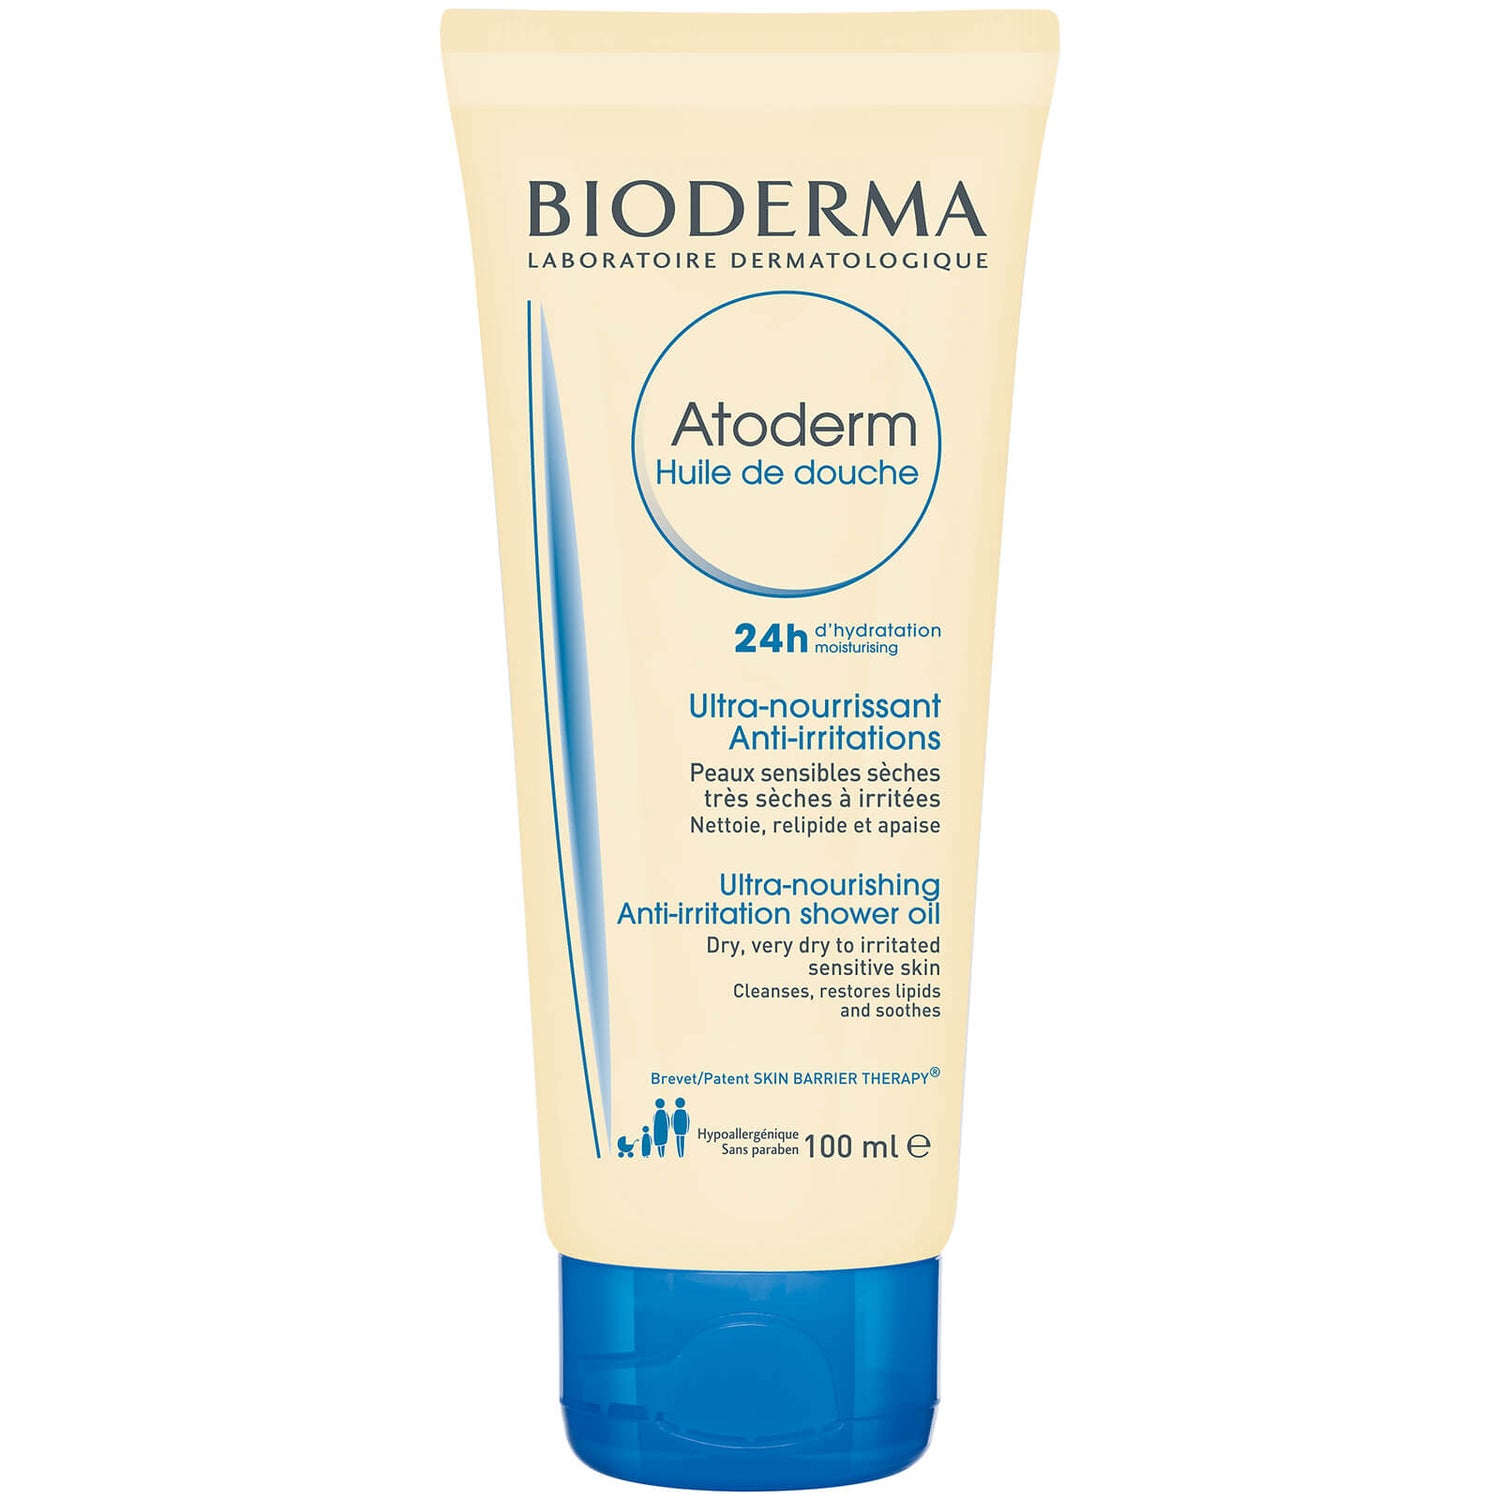 Bioderma Atoderm normal to very dry skin face and body cleanser